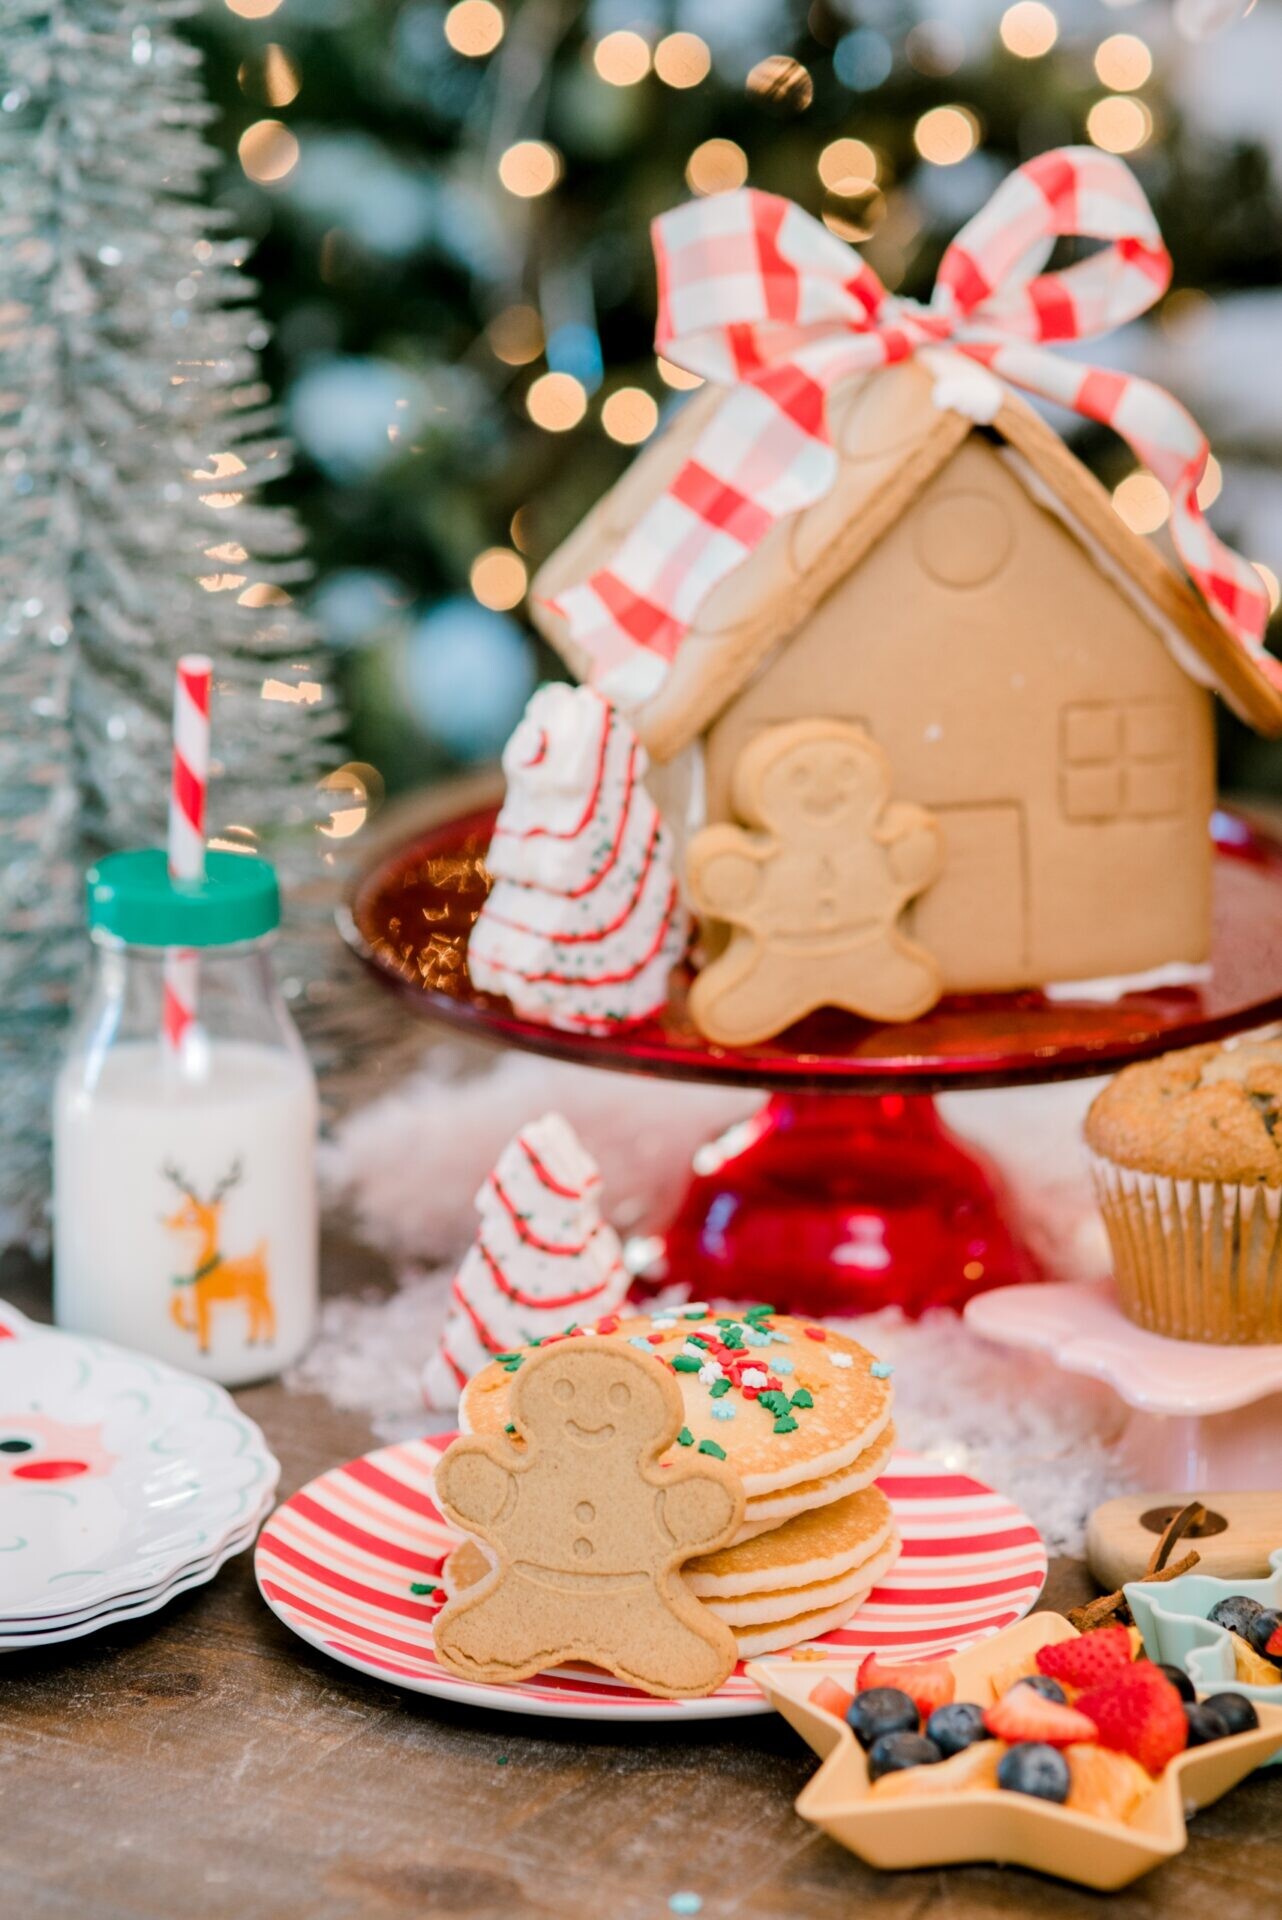 Gingerbread House: Gingerbread men, Christmas-themed biscuits, Christmas tree ornaments, Festive centerpiece. 1290x1920 HD Background.